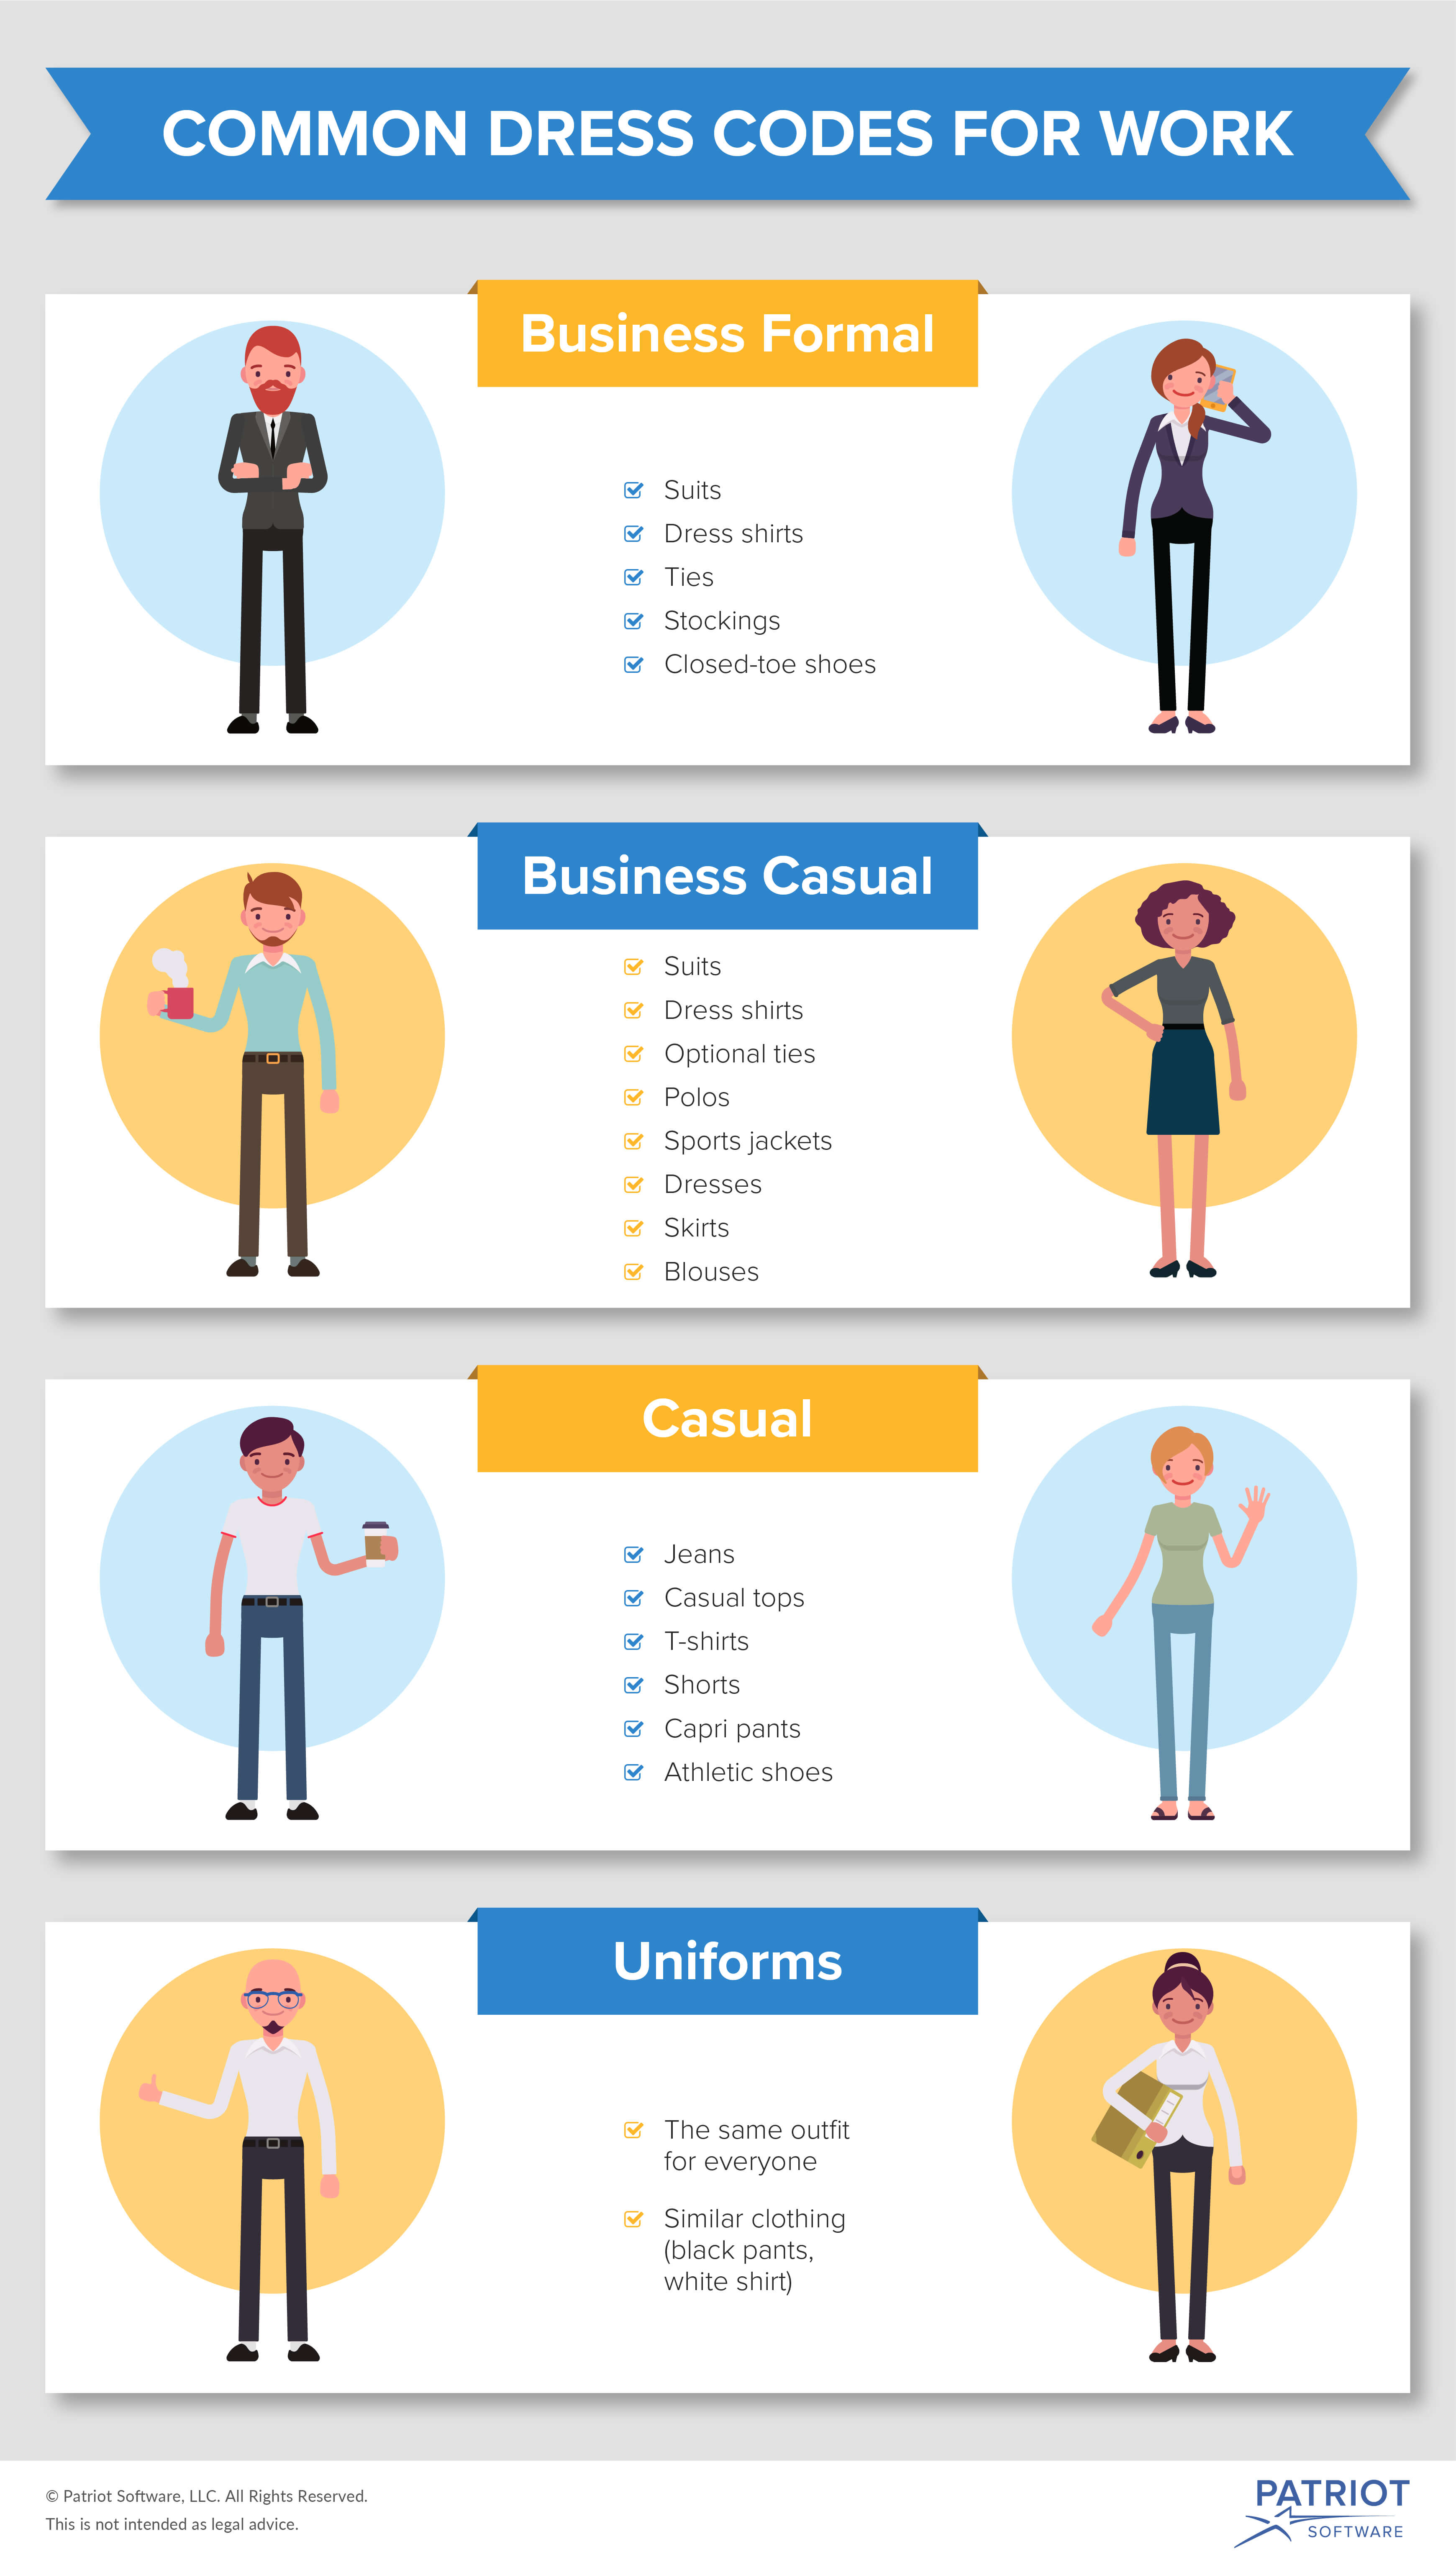 Common Dress Codes for Work Infographic